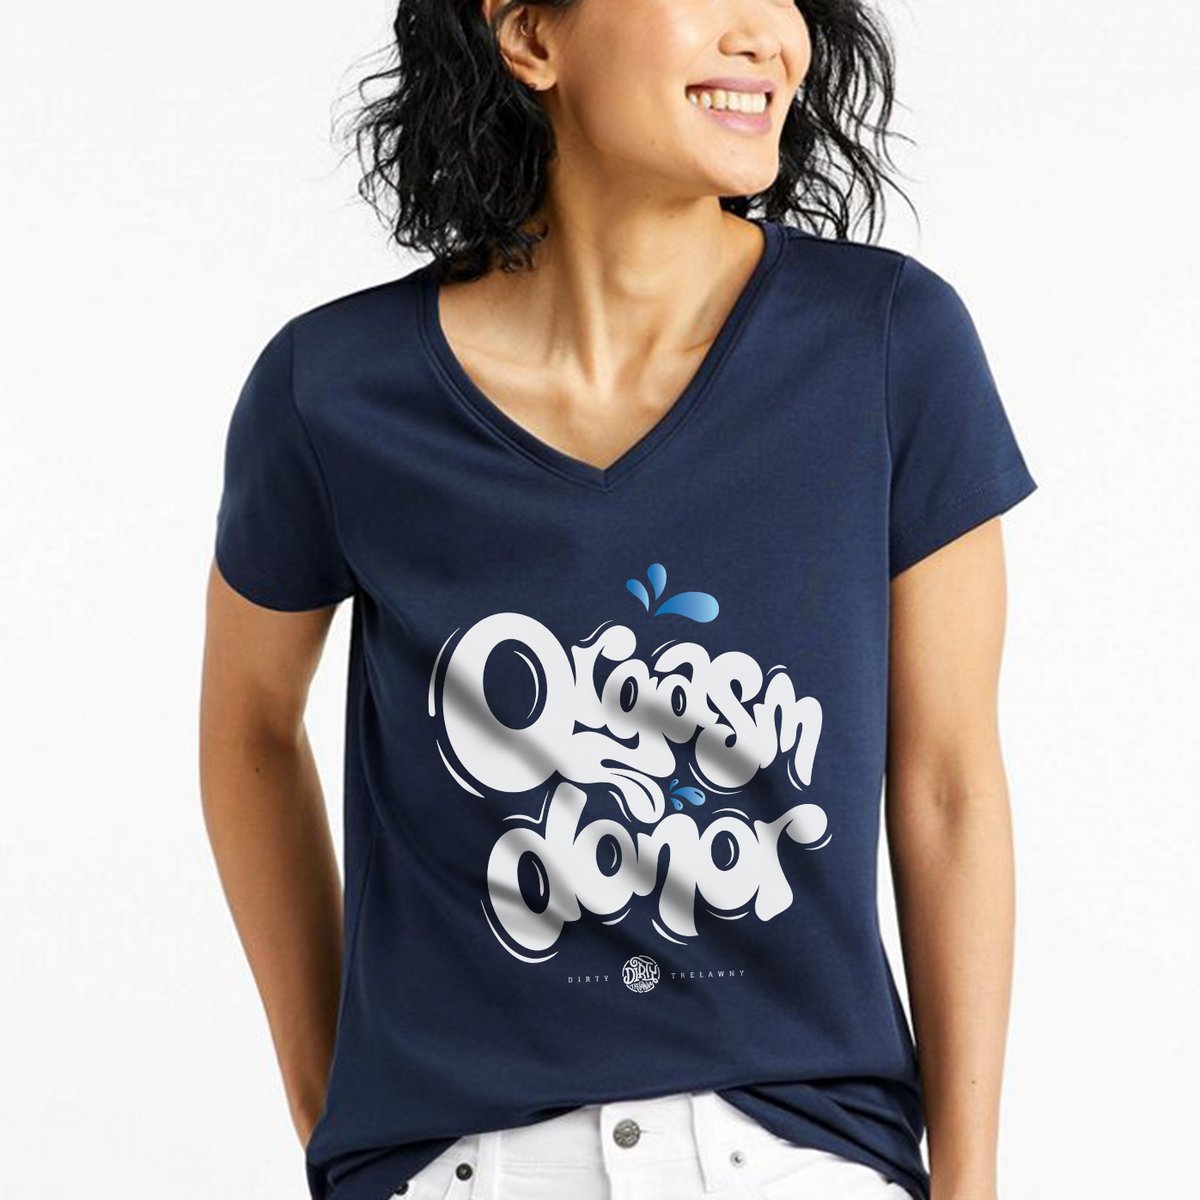 Our classic orgasm donor vneck tee is available. Treat yourself, ladies. amazon.com/dp/B0CRGTT5PW